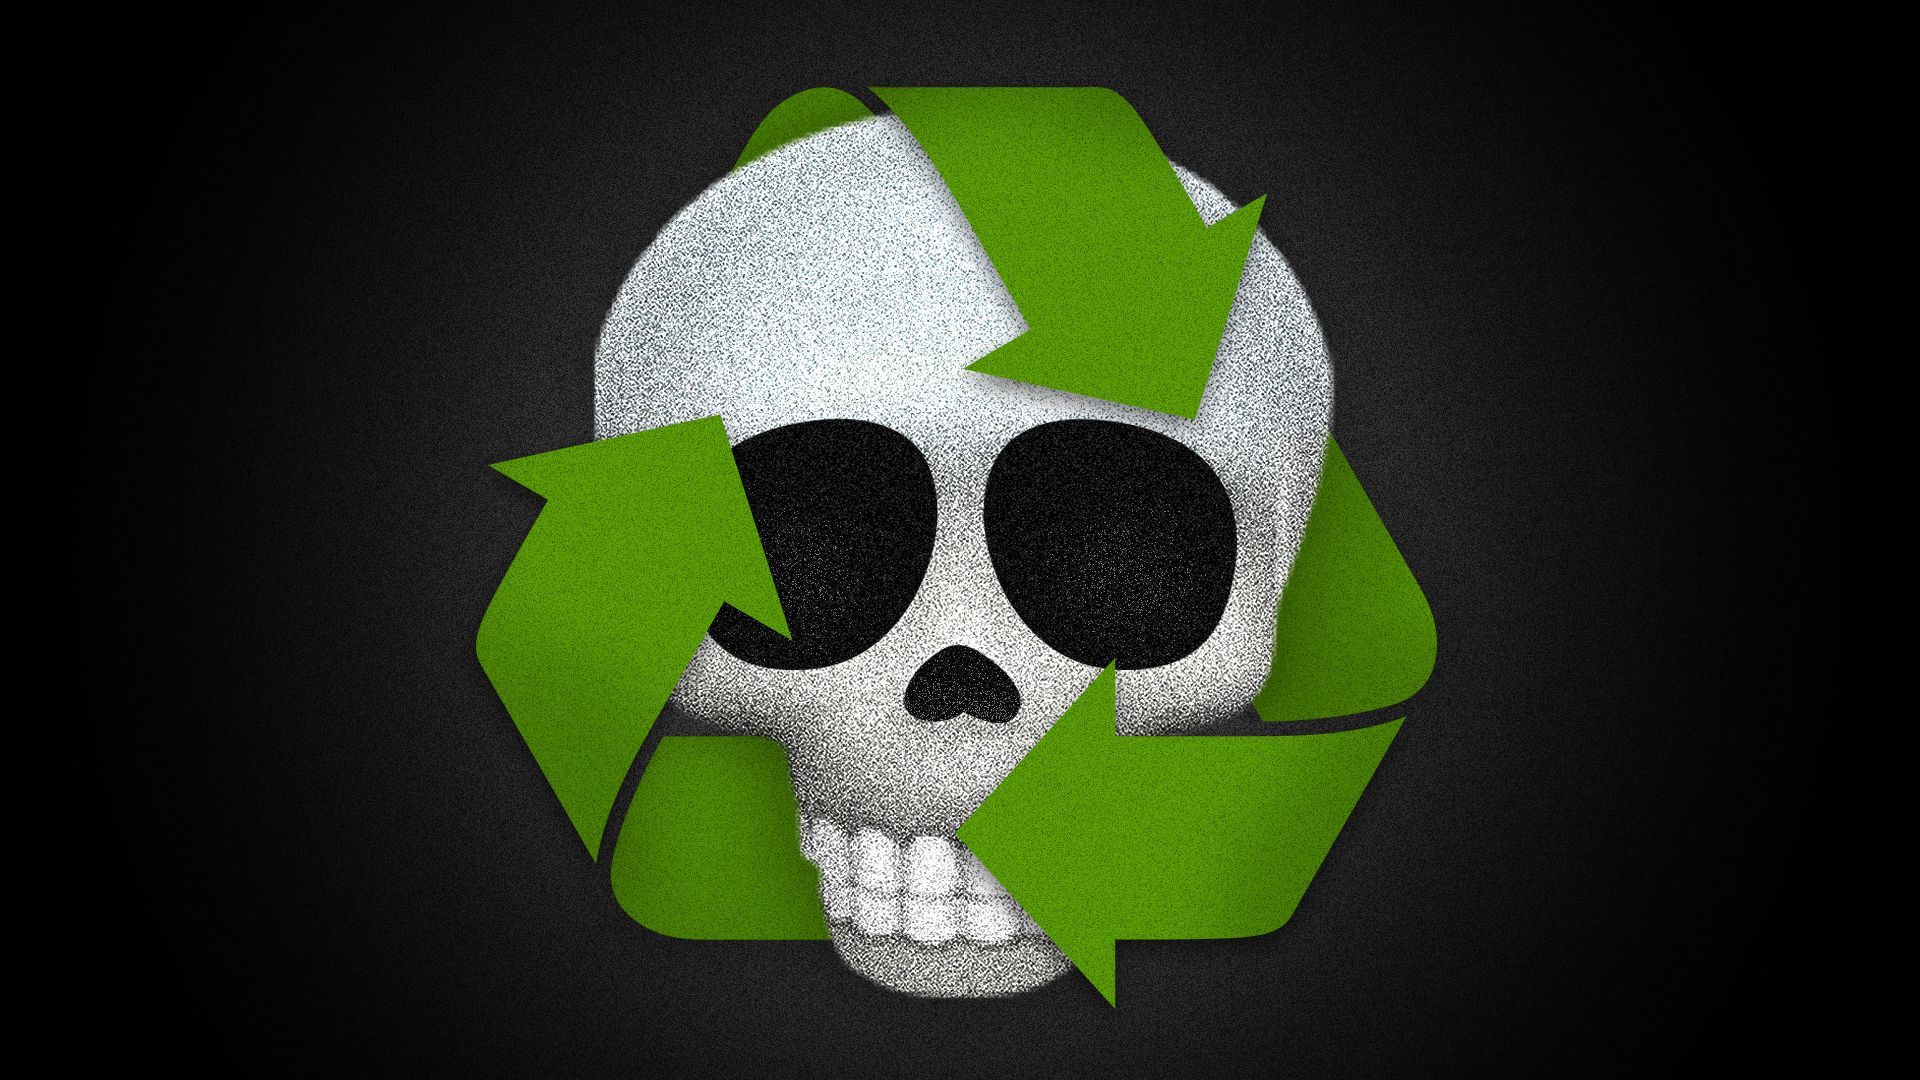 Illustration of a skull surrounded by a recycling symbol